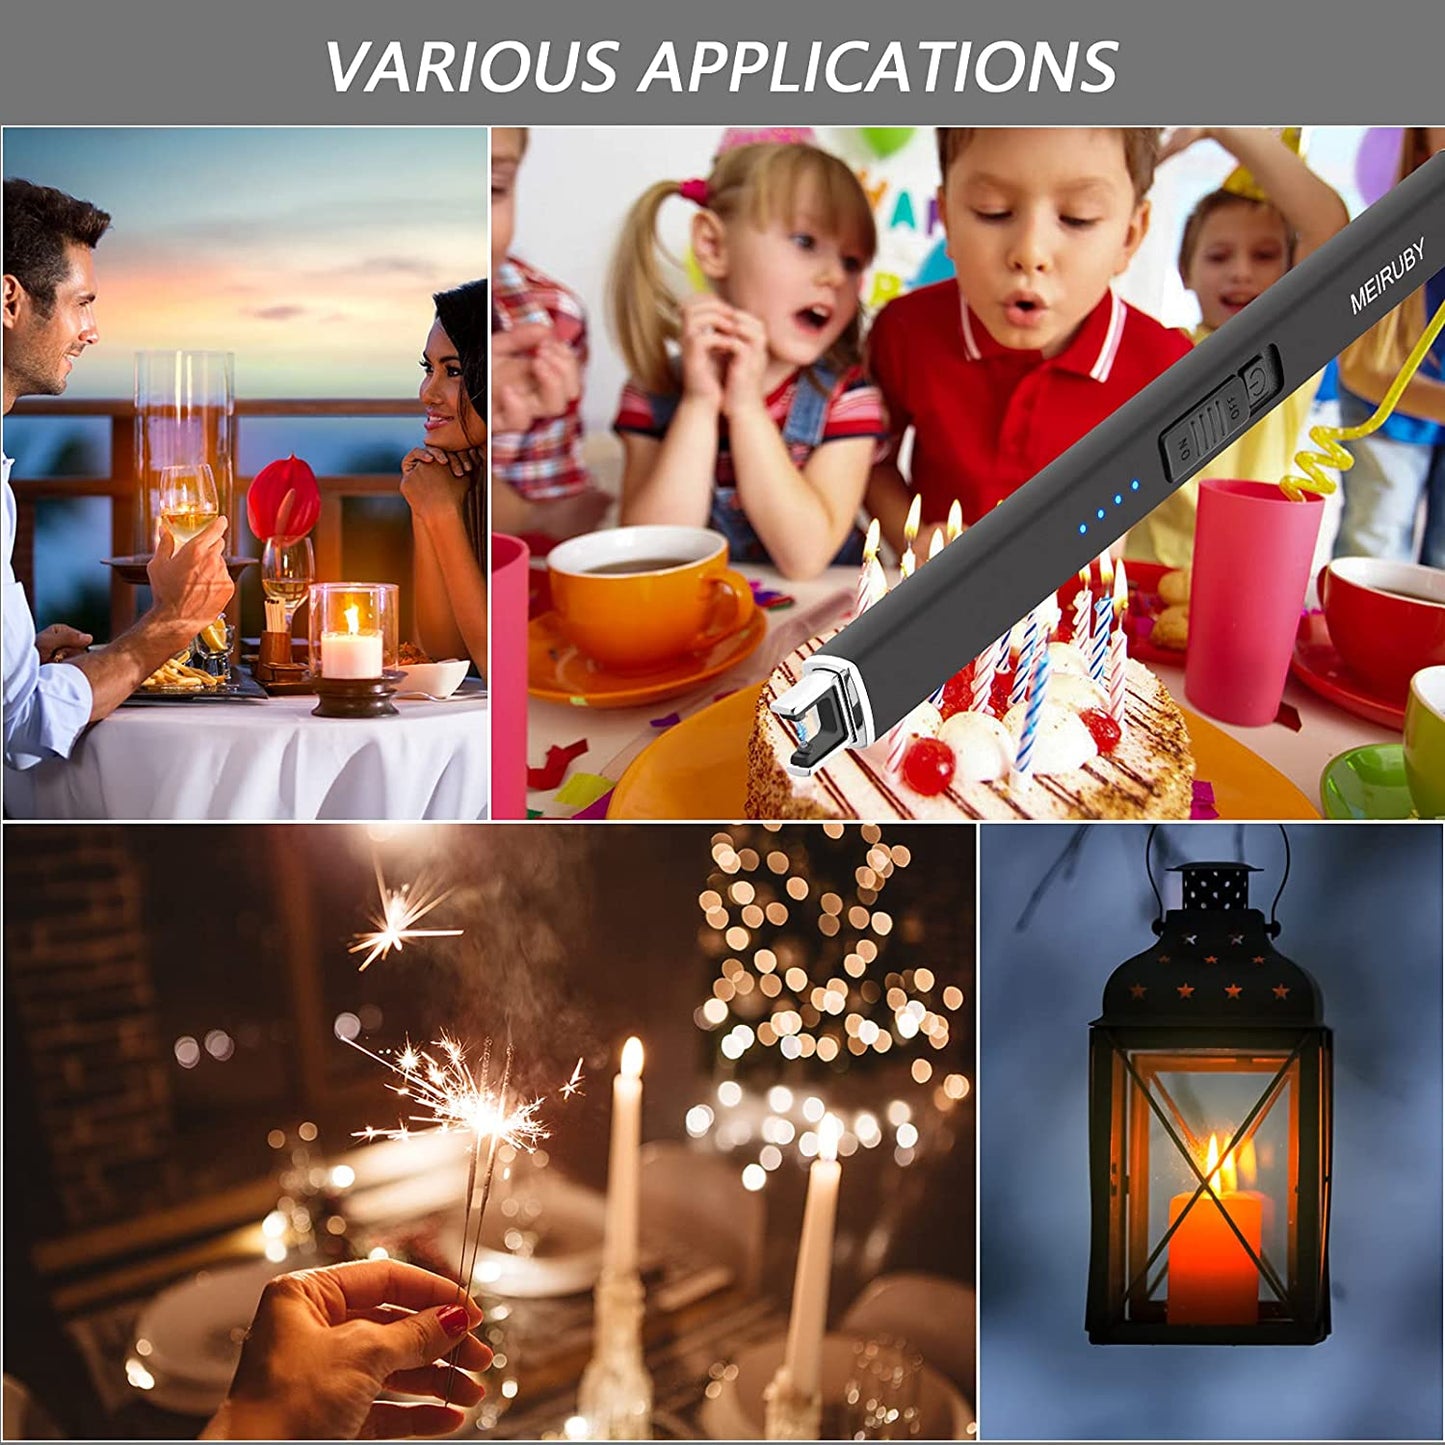 MEIRUBY Lighter Electric Lighter Candle Lighter Rechargeable USB Lighter Arc Lighters for Candle Camping Family Use Silver